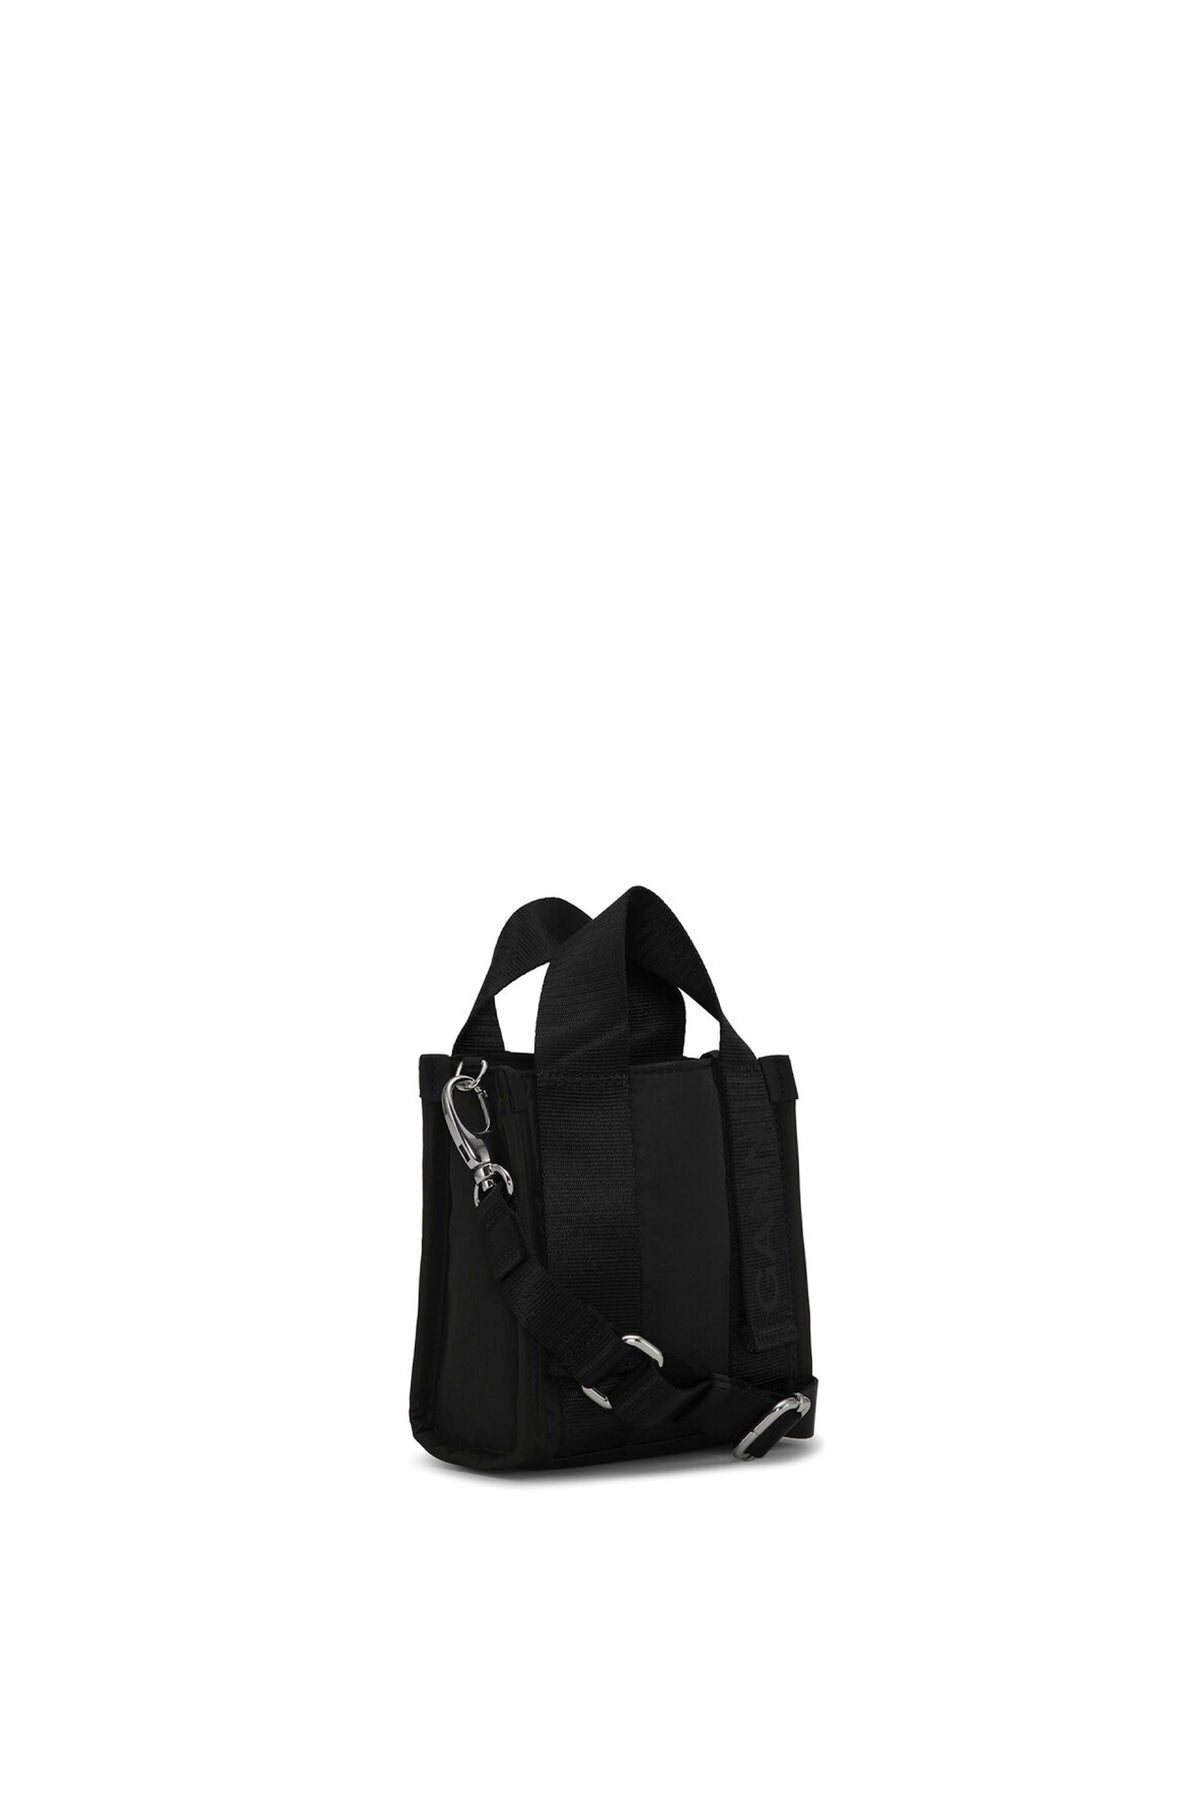 RECYCLED TECH MINI TOTE / BLK